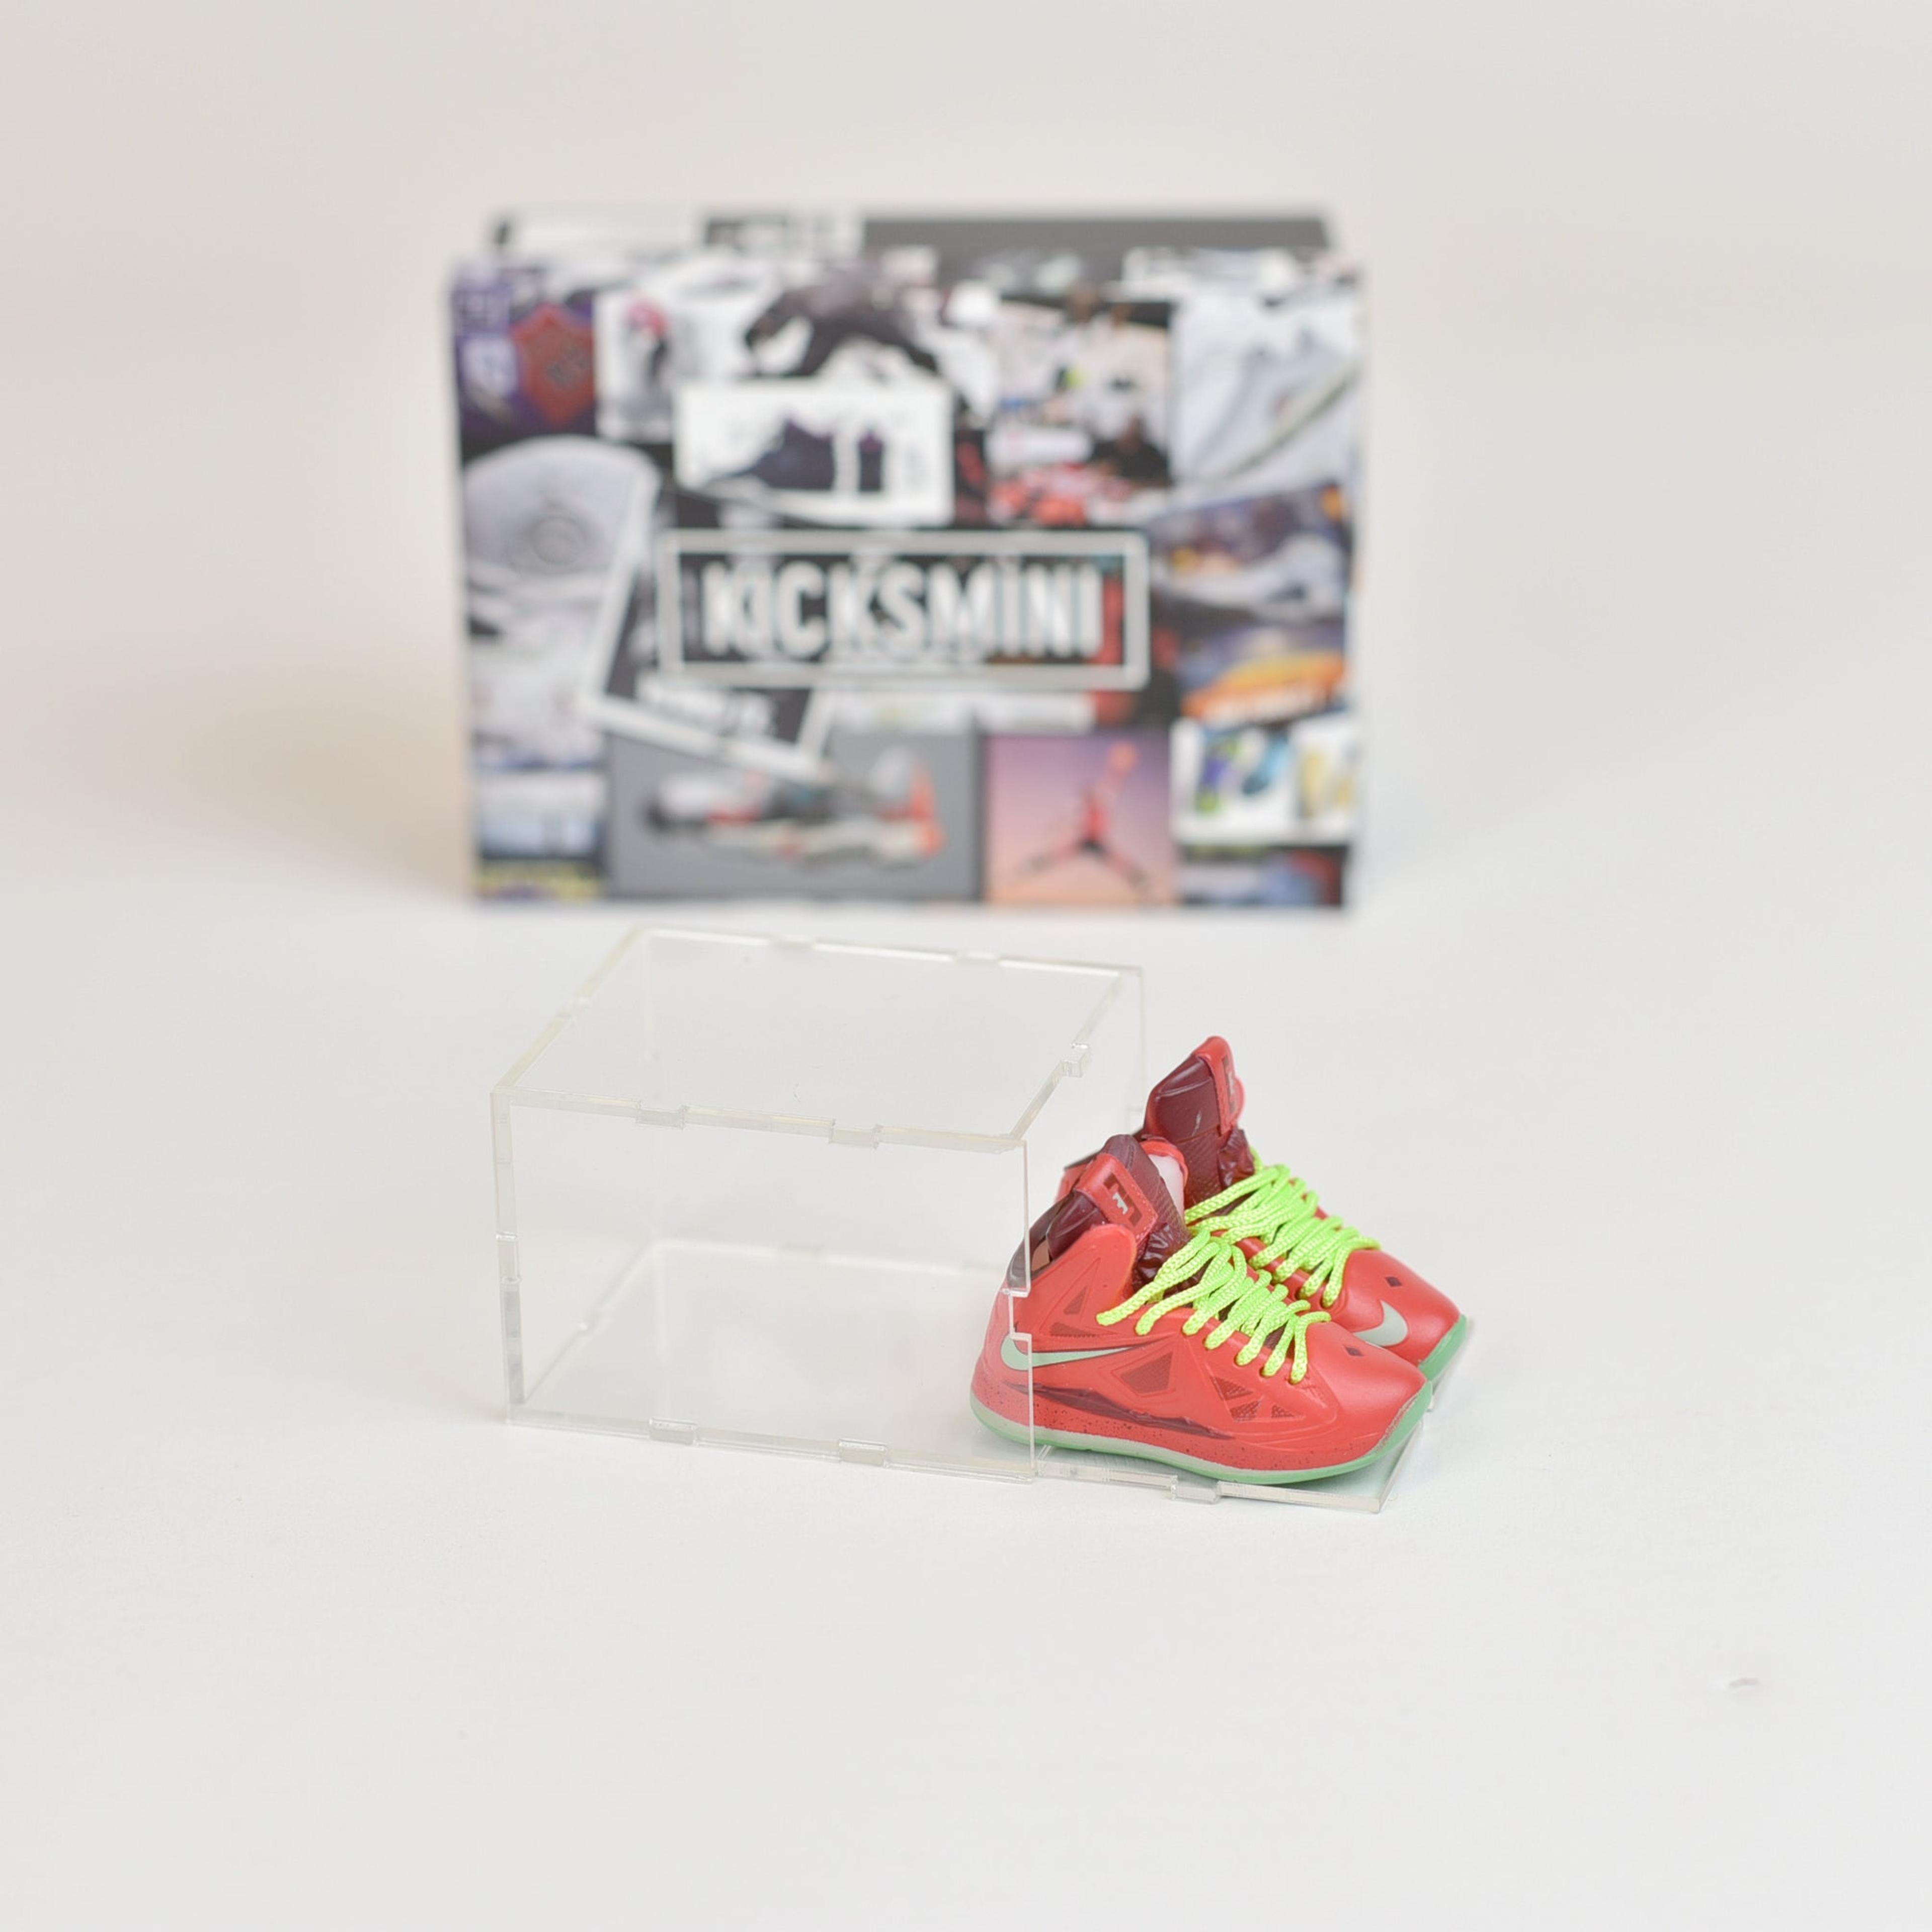 Alternate View 5 of Kobe Bryant/LeBron James/Steph Curry Mini Sneaker Collection wit